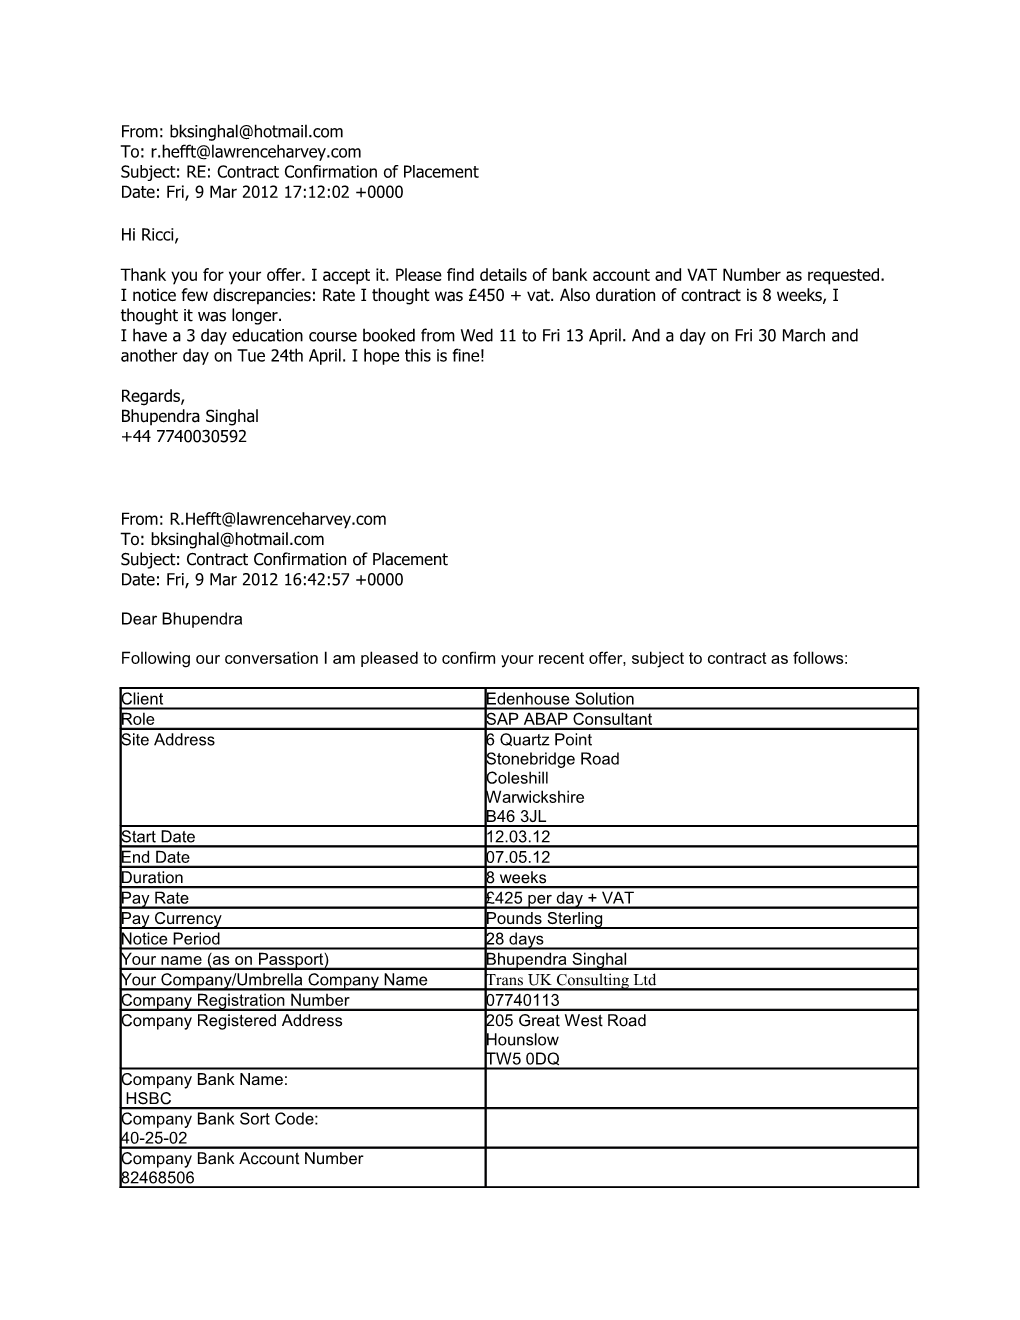 From: To: Subject: RE: Contract Confirmation of Placement Date: Fri, 9 Mar 2012 17:12:02 +0000